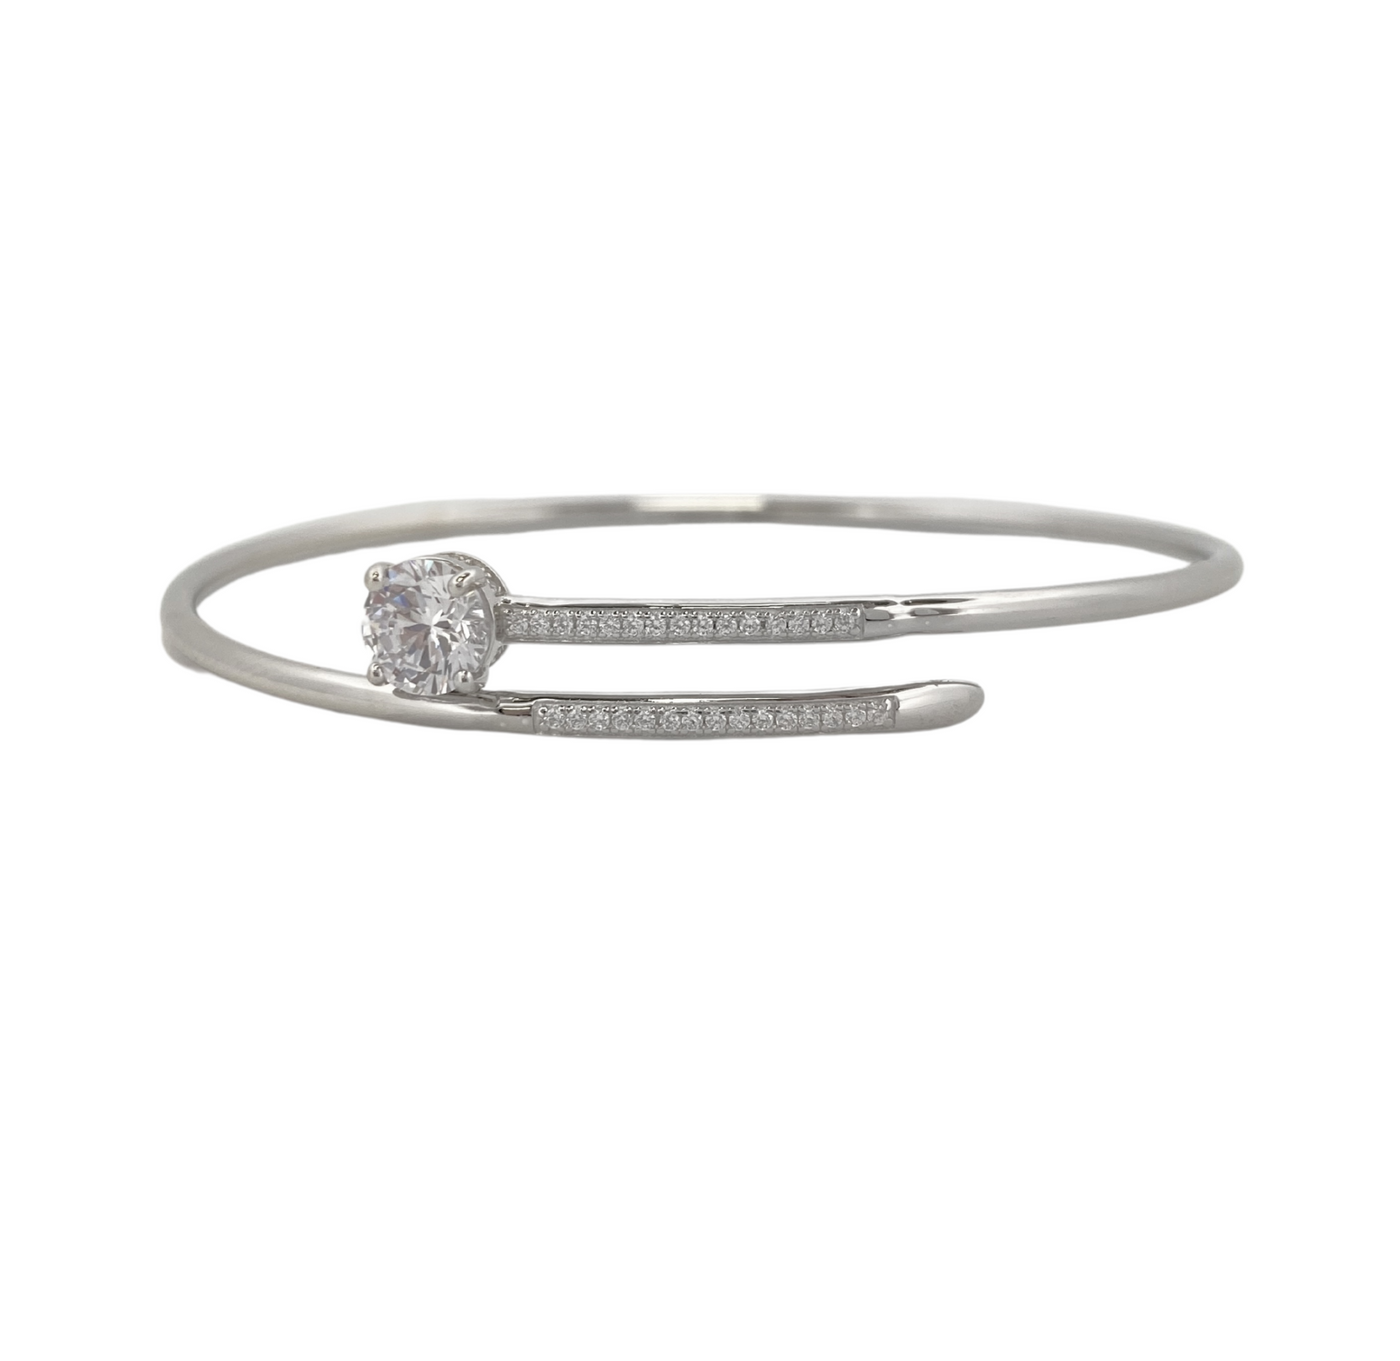 SILVER BANGLE WITH CZ